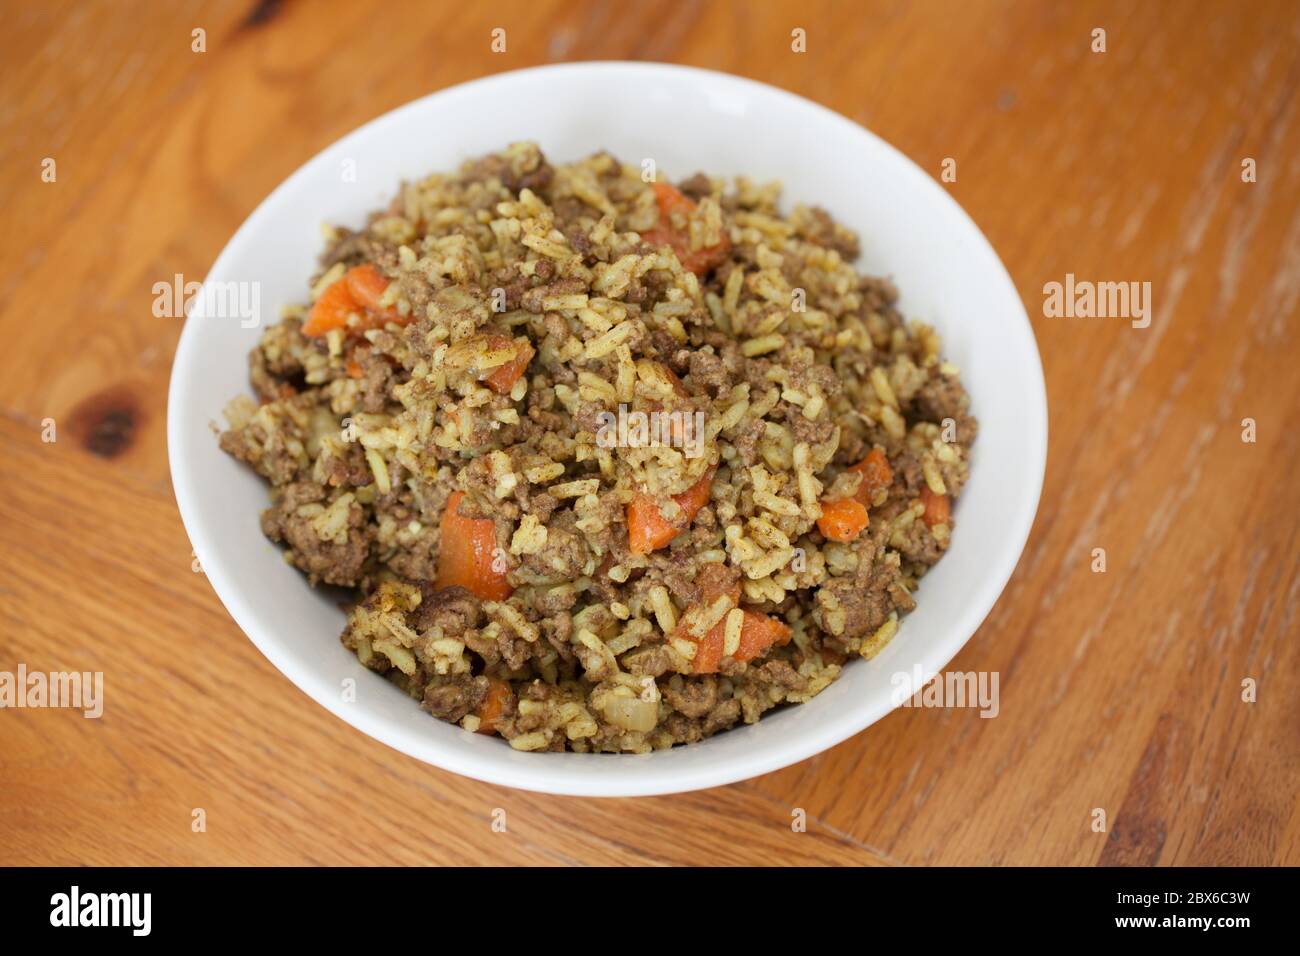 Iraqi carrot rice a typical dish served with minced beef Stock Photo